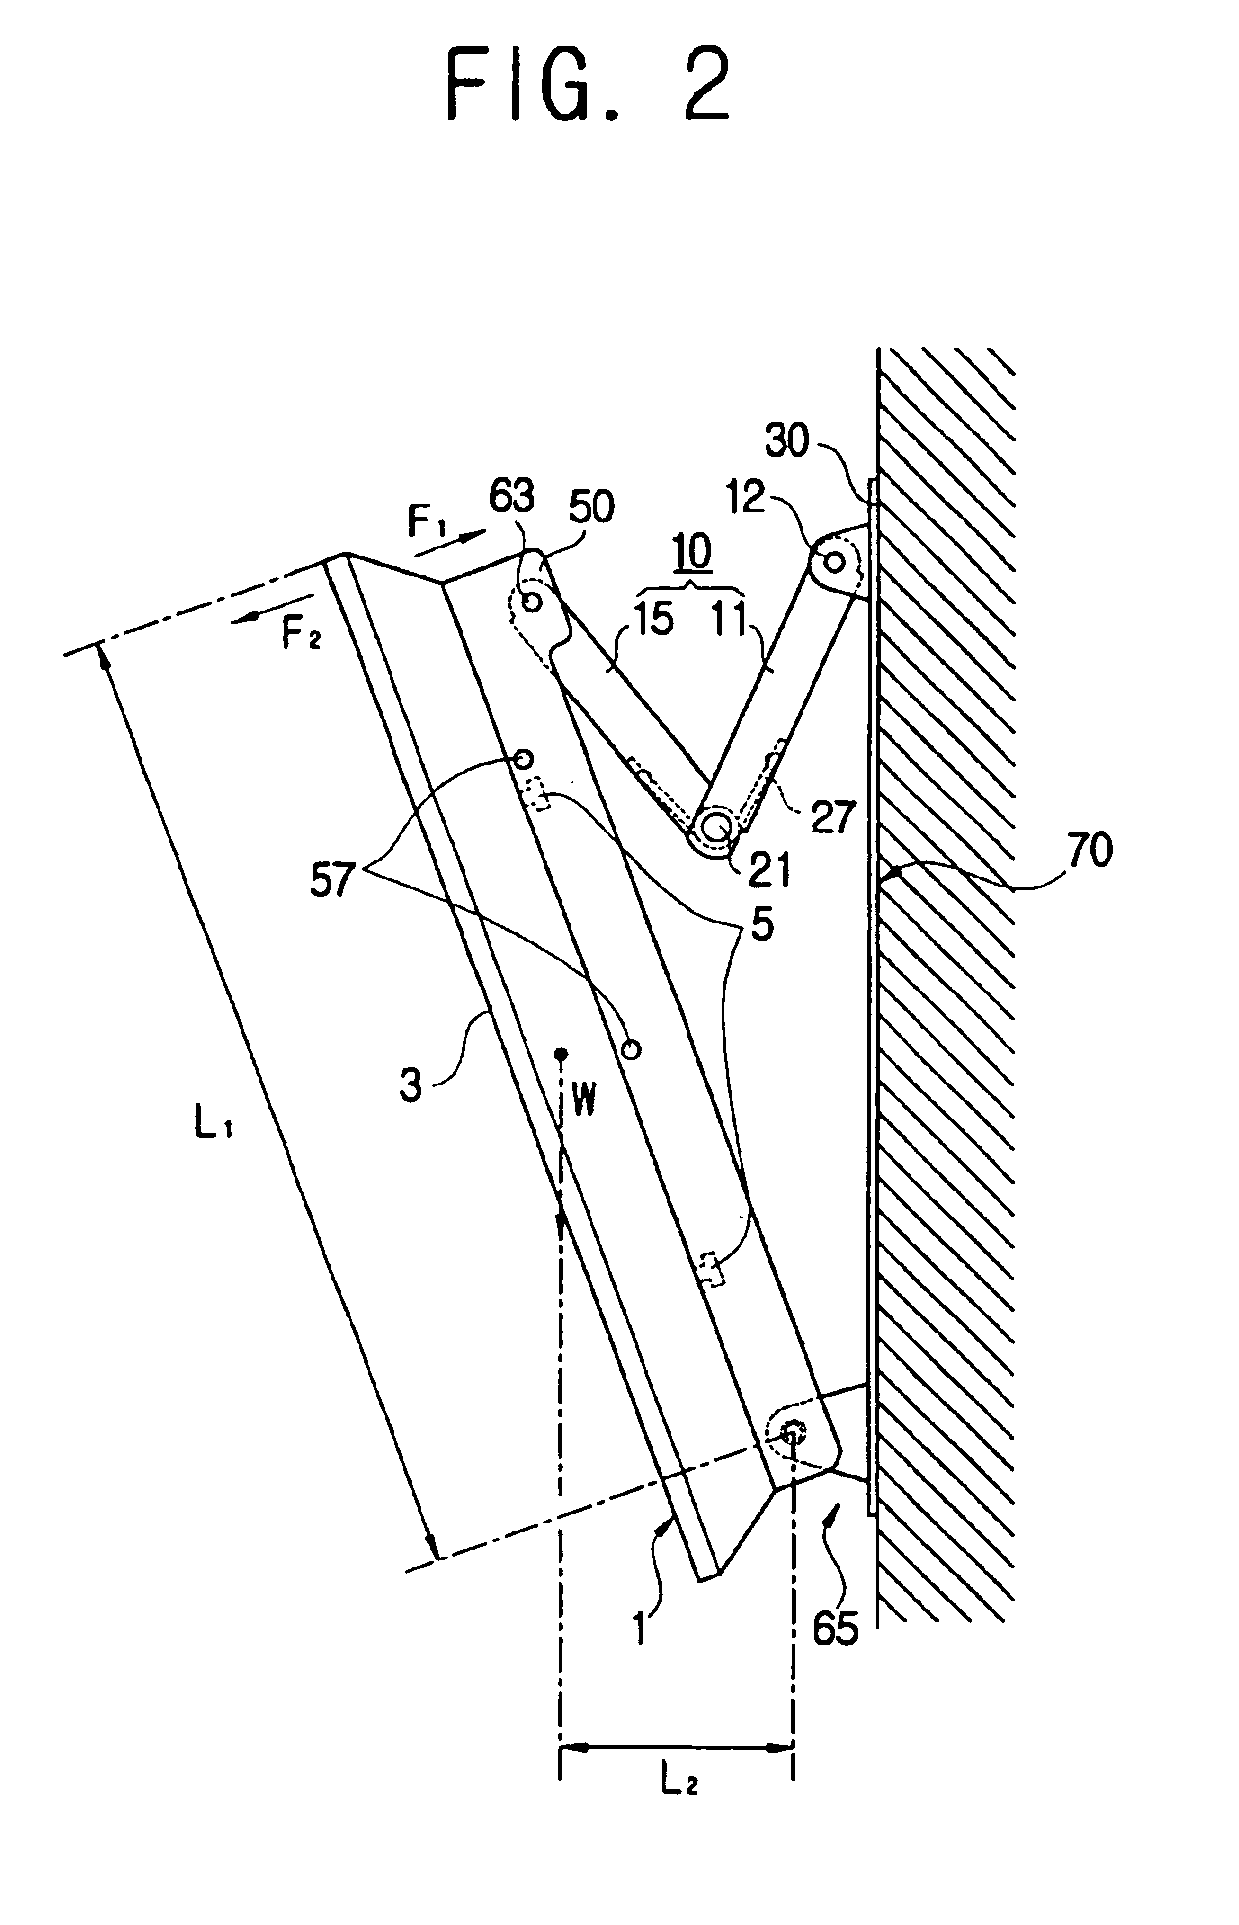 Display apparatus having a structure for wall mounting